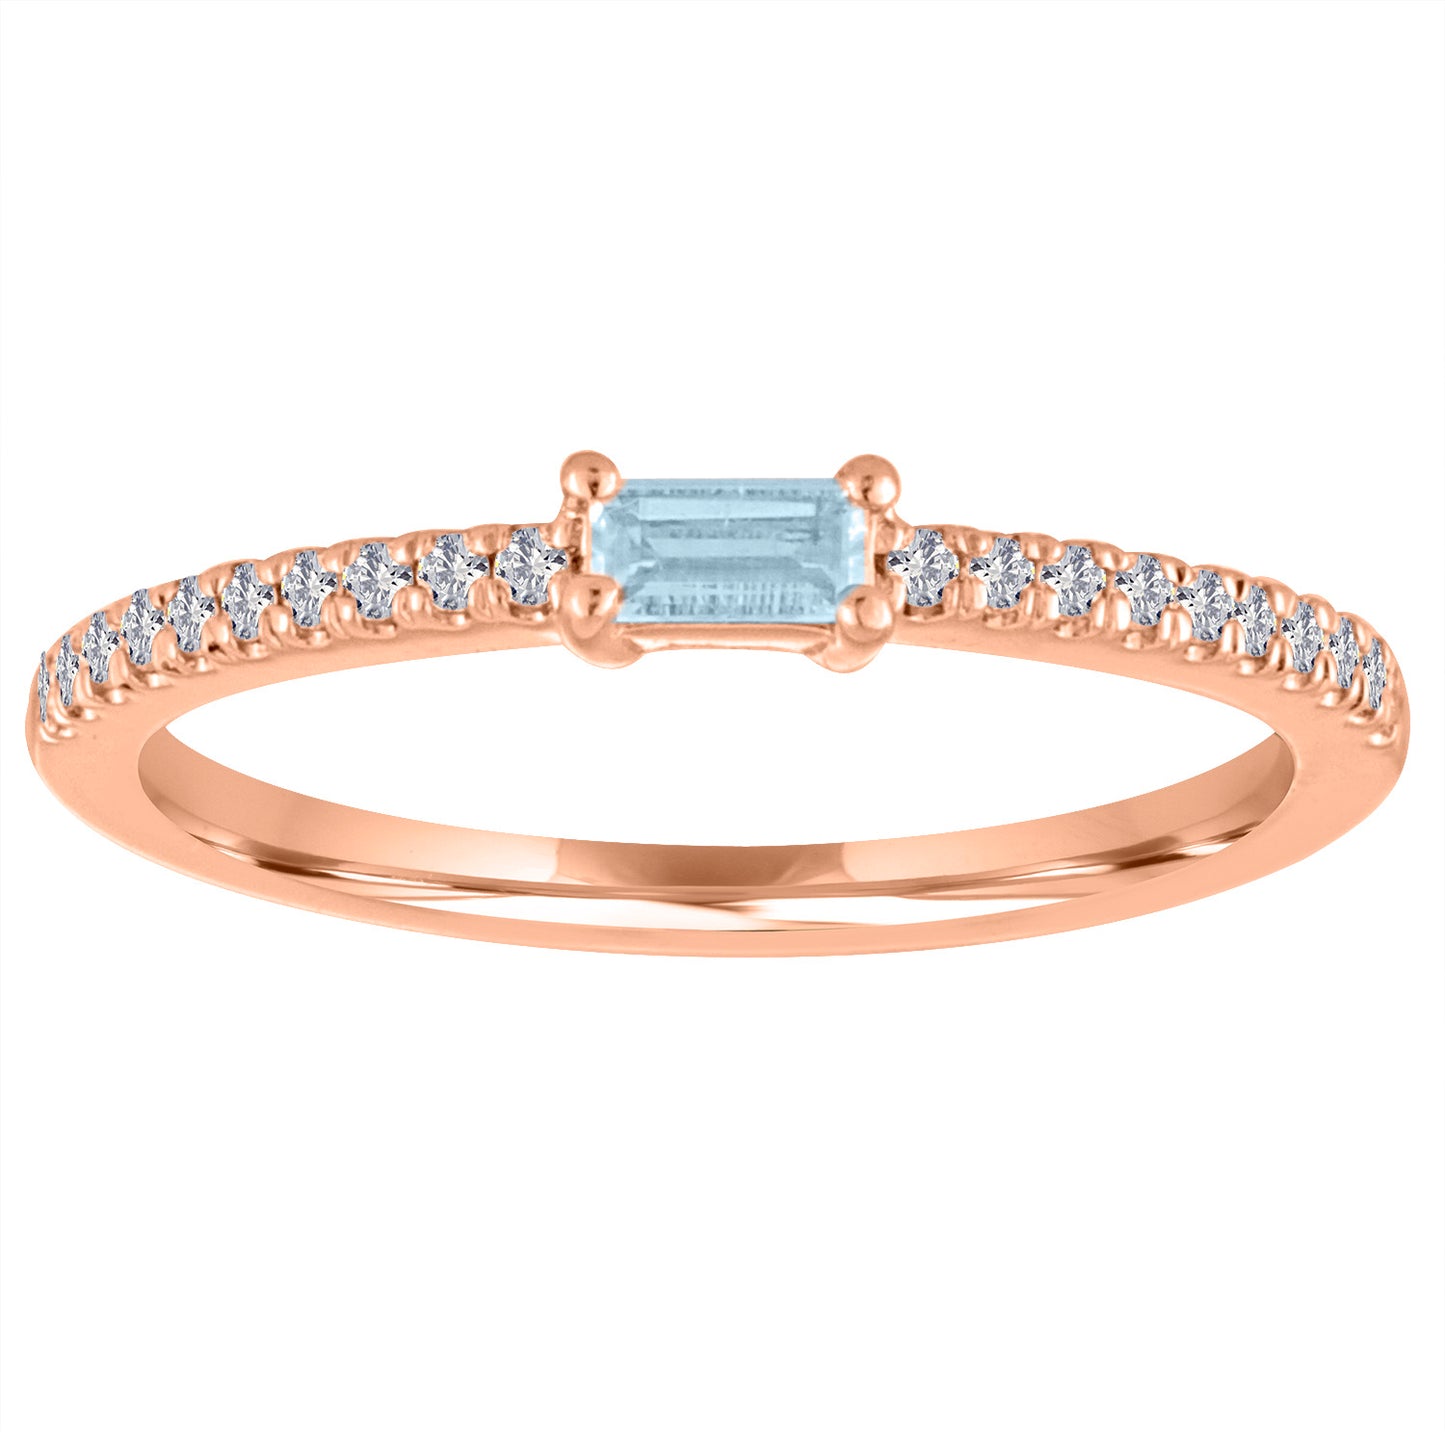 Rose gold skinny band with an aquamarine baguette in the center and round diamonds on the shank.